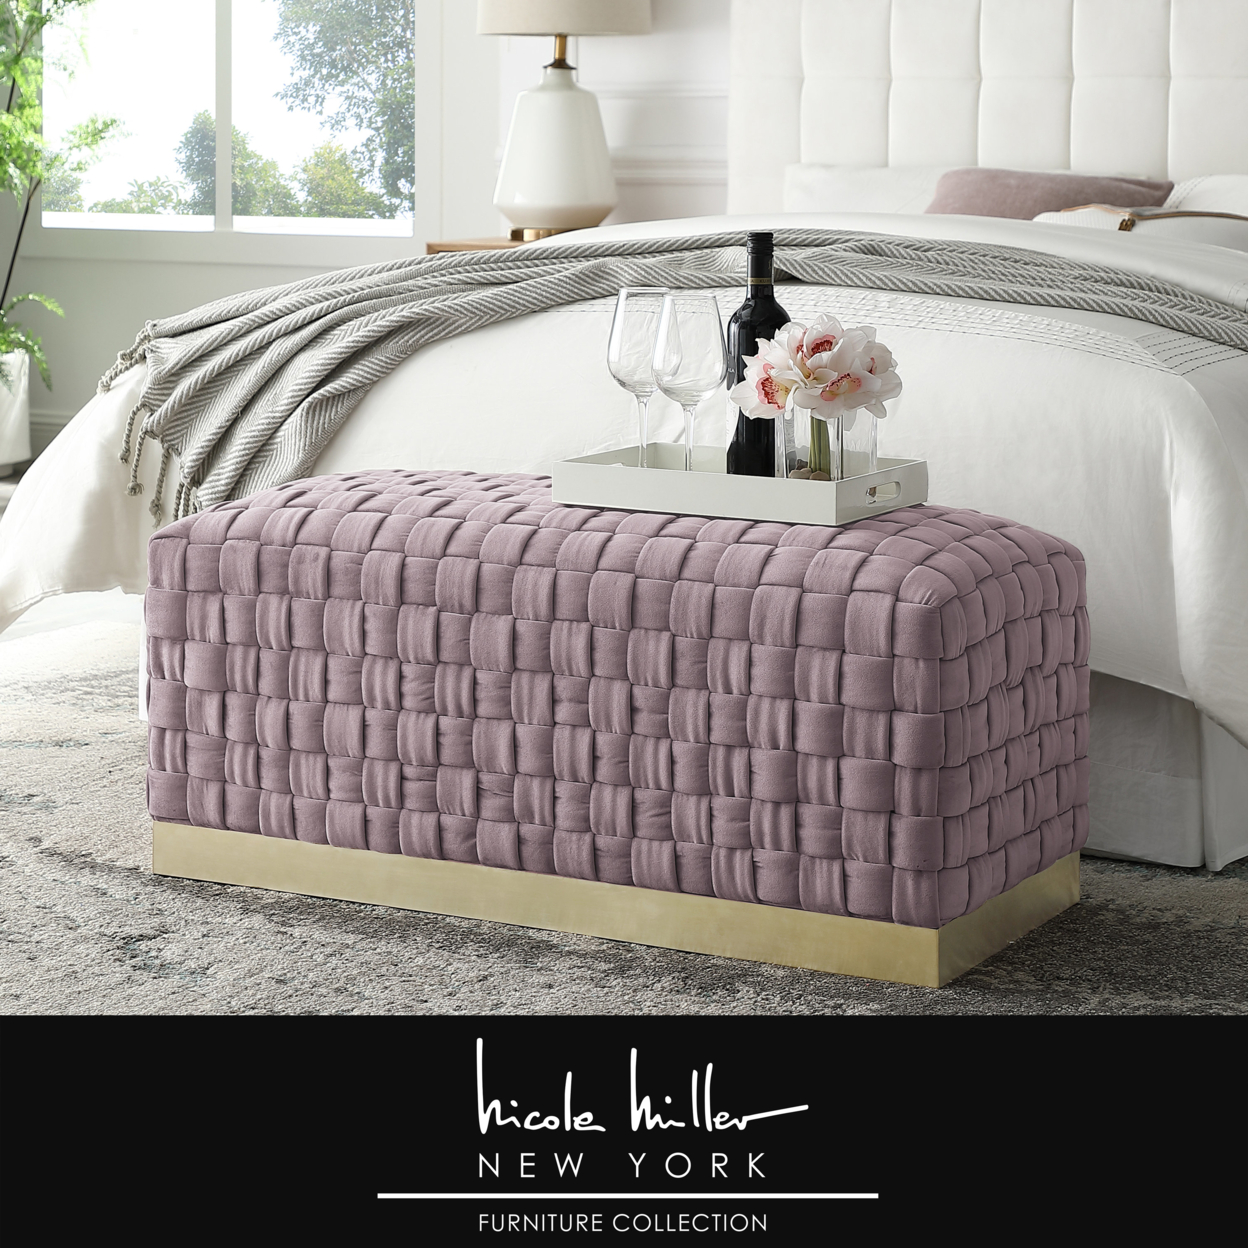 Griffin Velvet Hand Woven Bench-Luxurious Upholstery-Matte Stainless Steel Base-By Nicole Miller - Lilac/ Gold